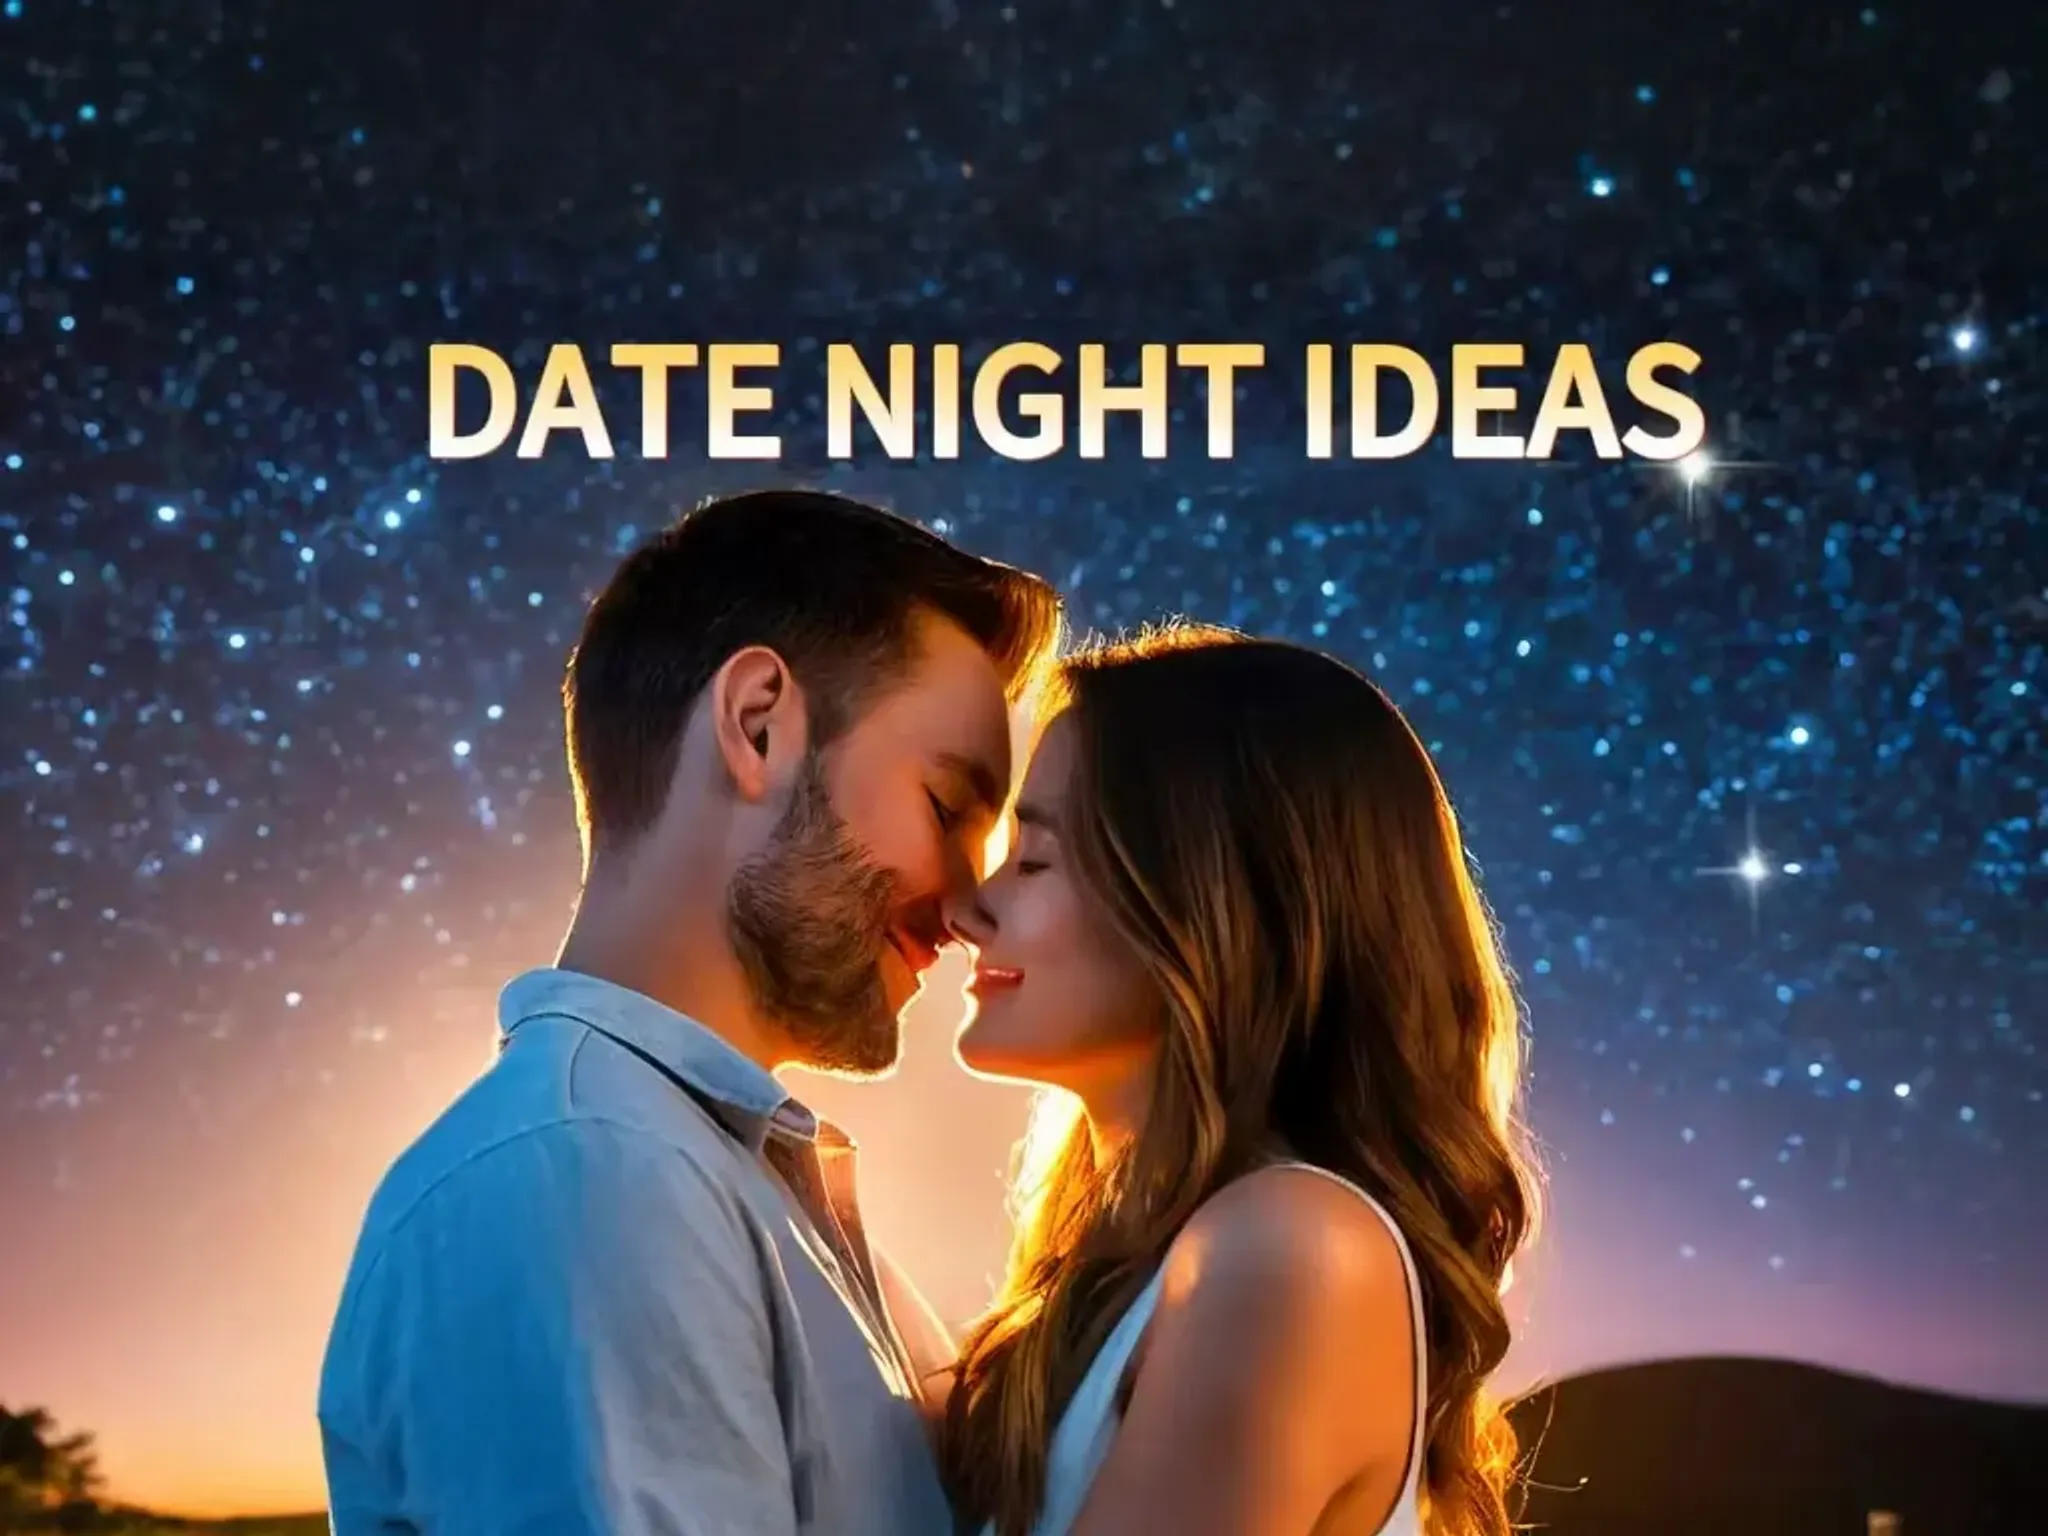 Perfect Date Night Ideas for Singles: A WooPlus Guide